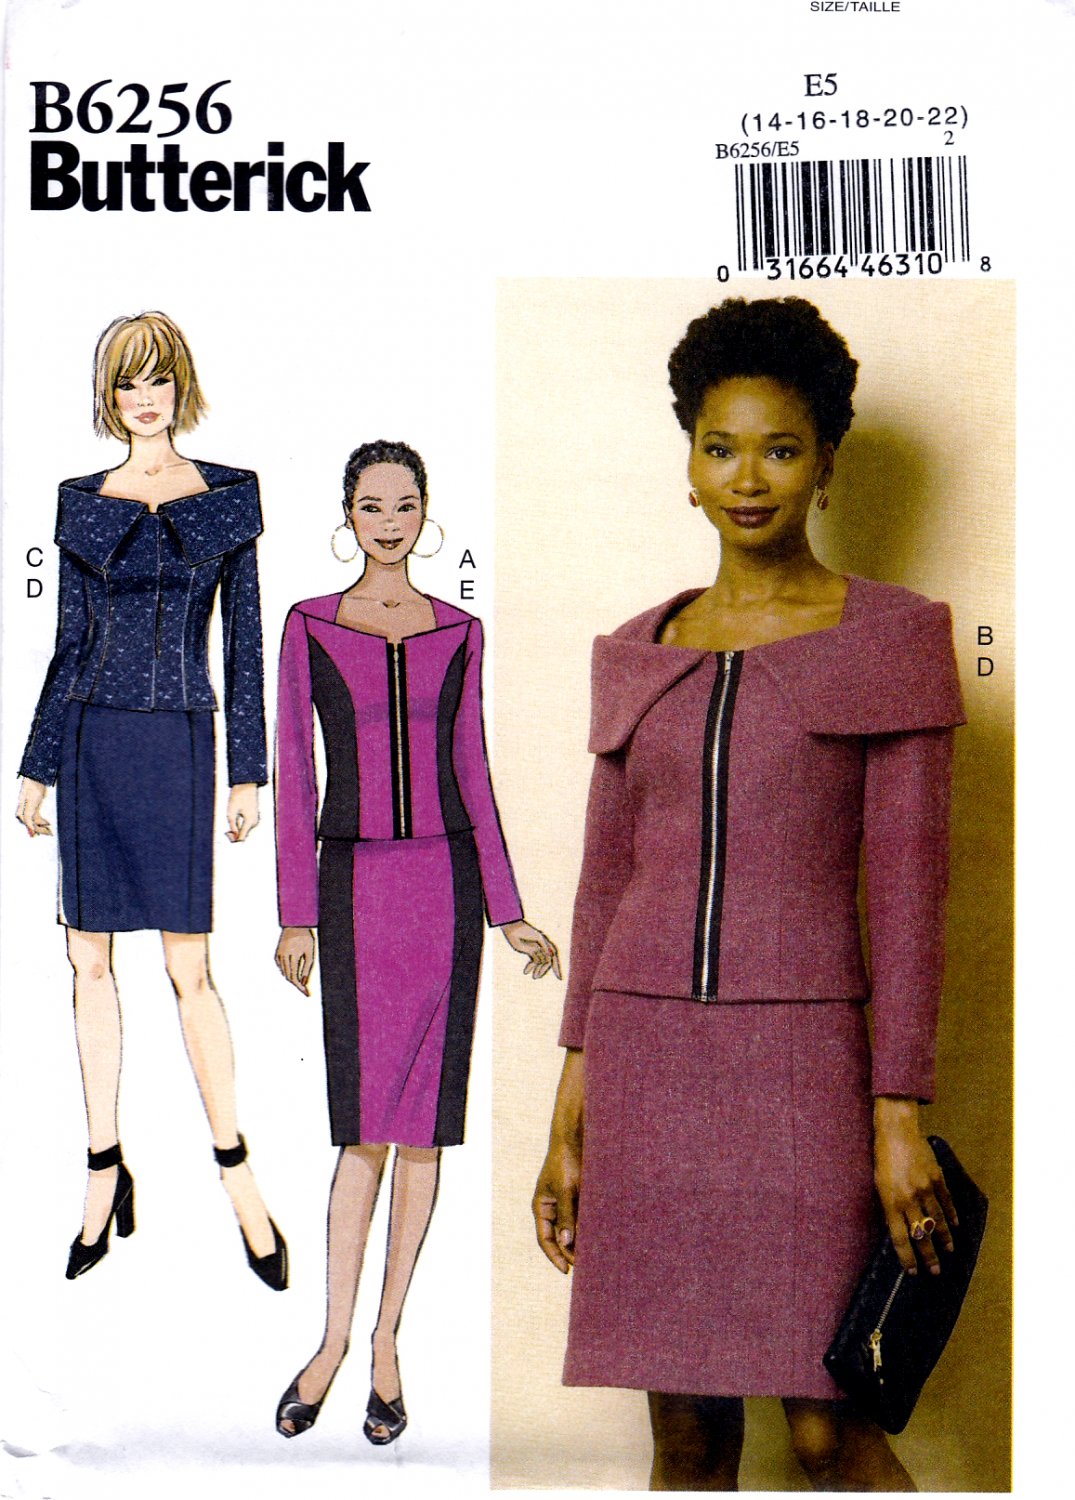 Butterick B6256 Misses Womens Jacket and Skirt Sewing Pattern Sizes 14-16-18-20-22